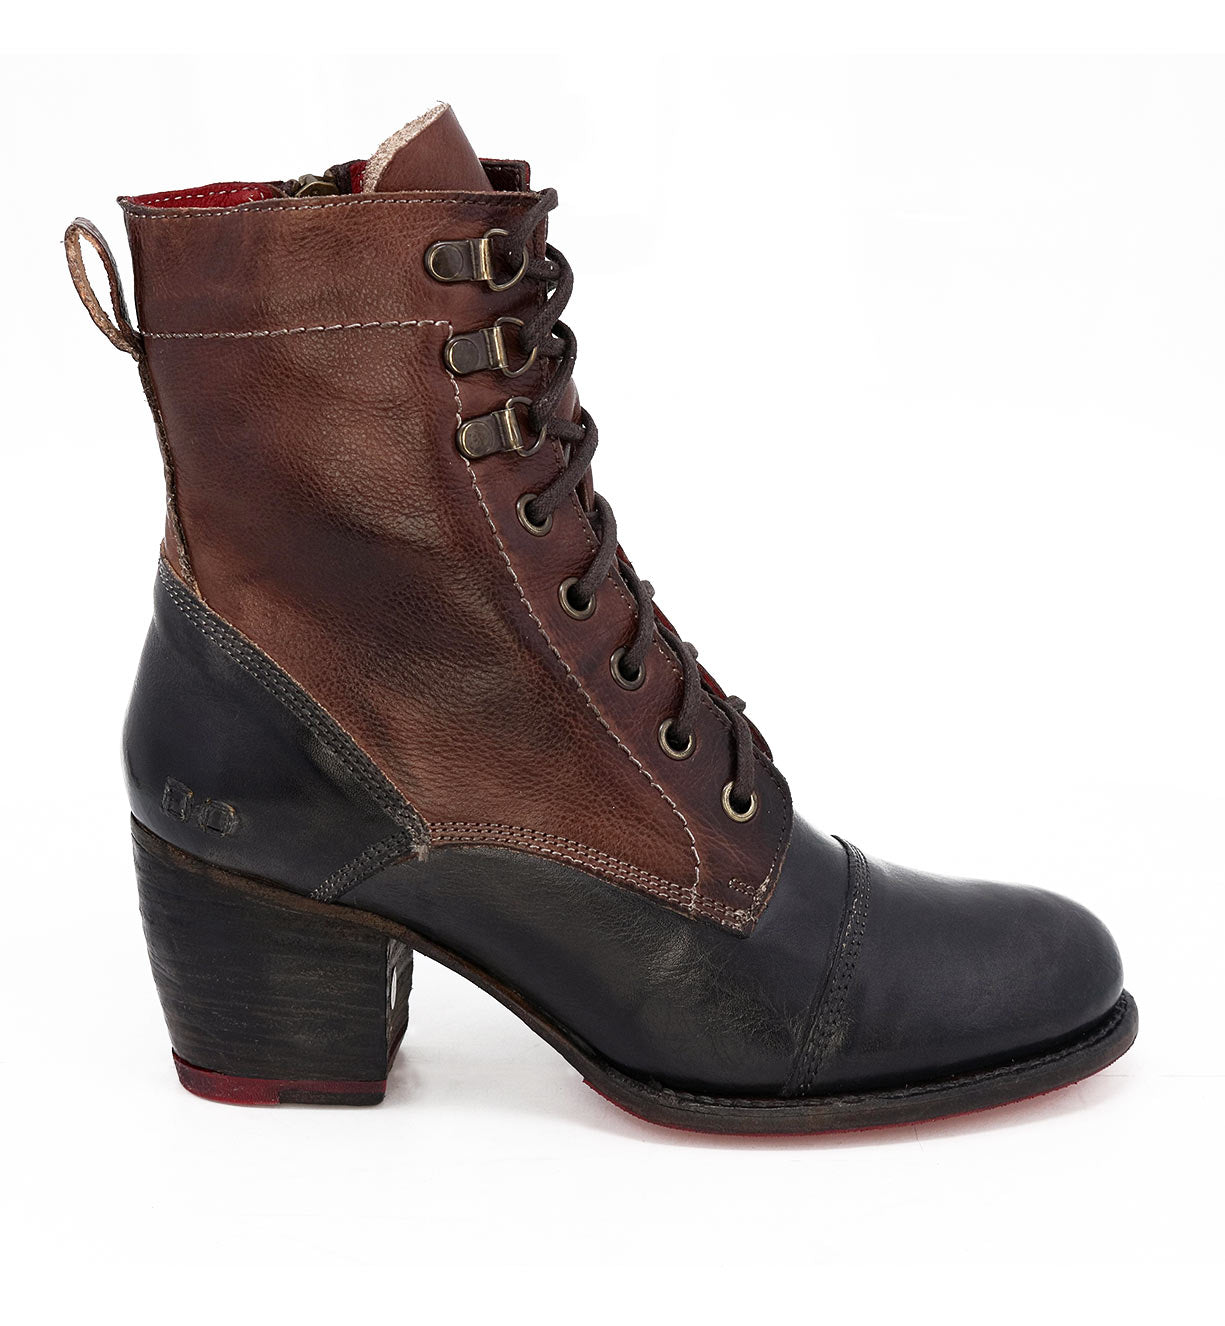 A women's Judgement boot by Bed Stu with a lace up.